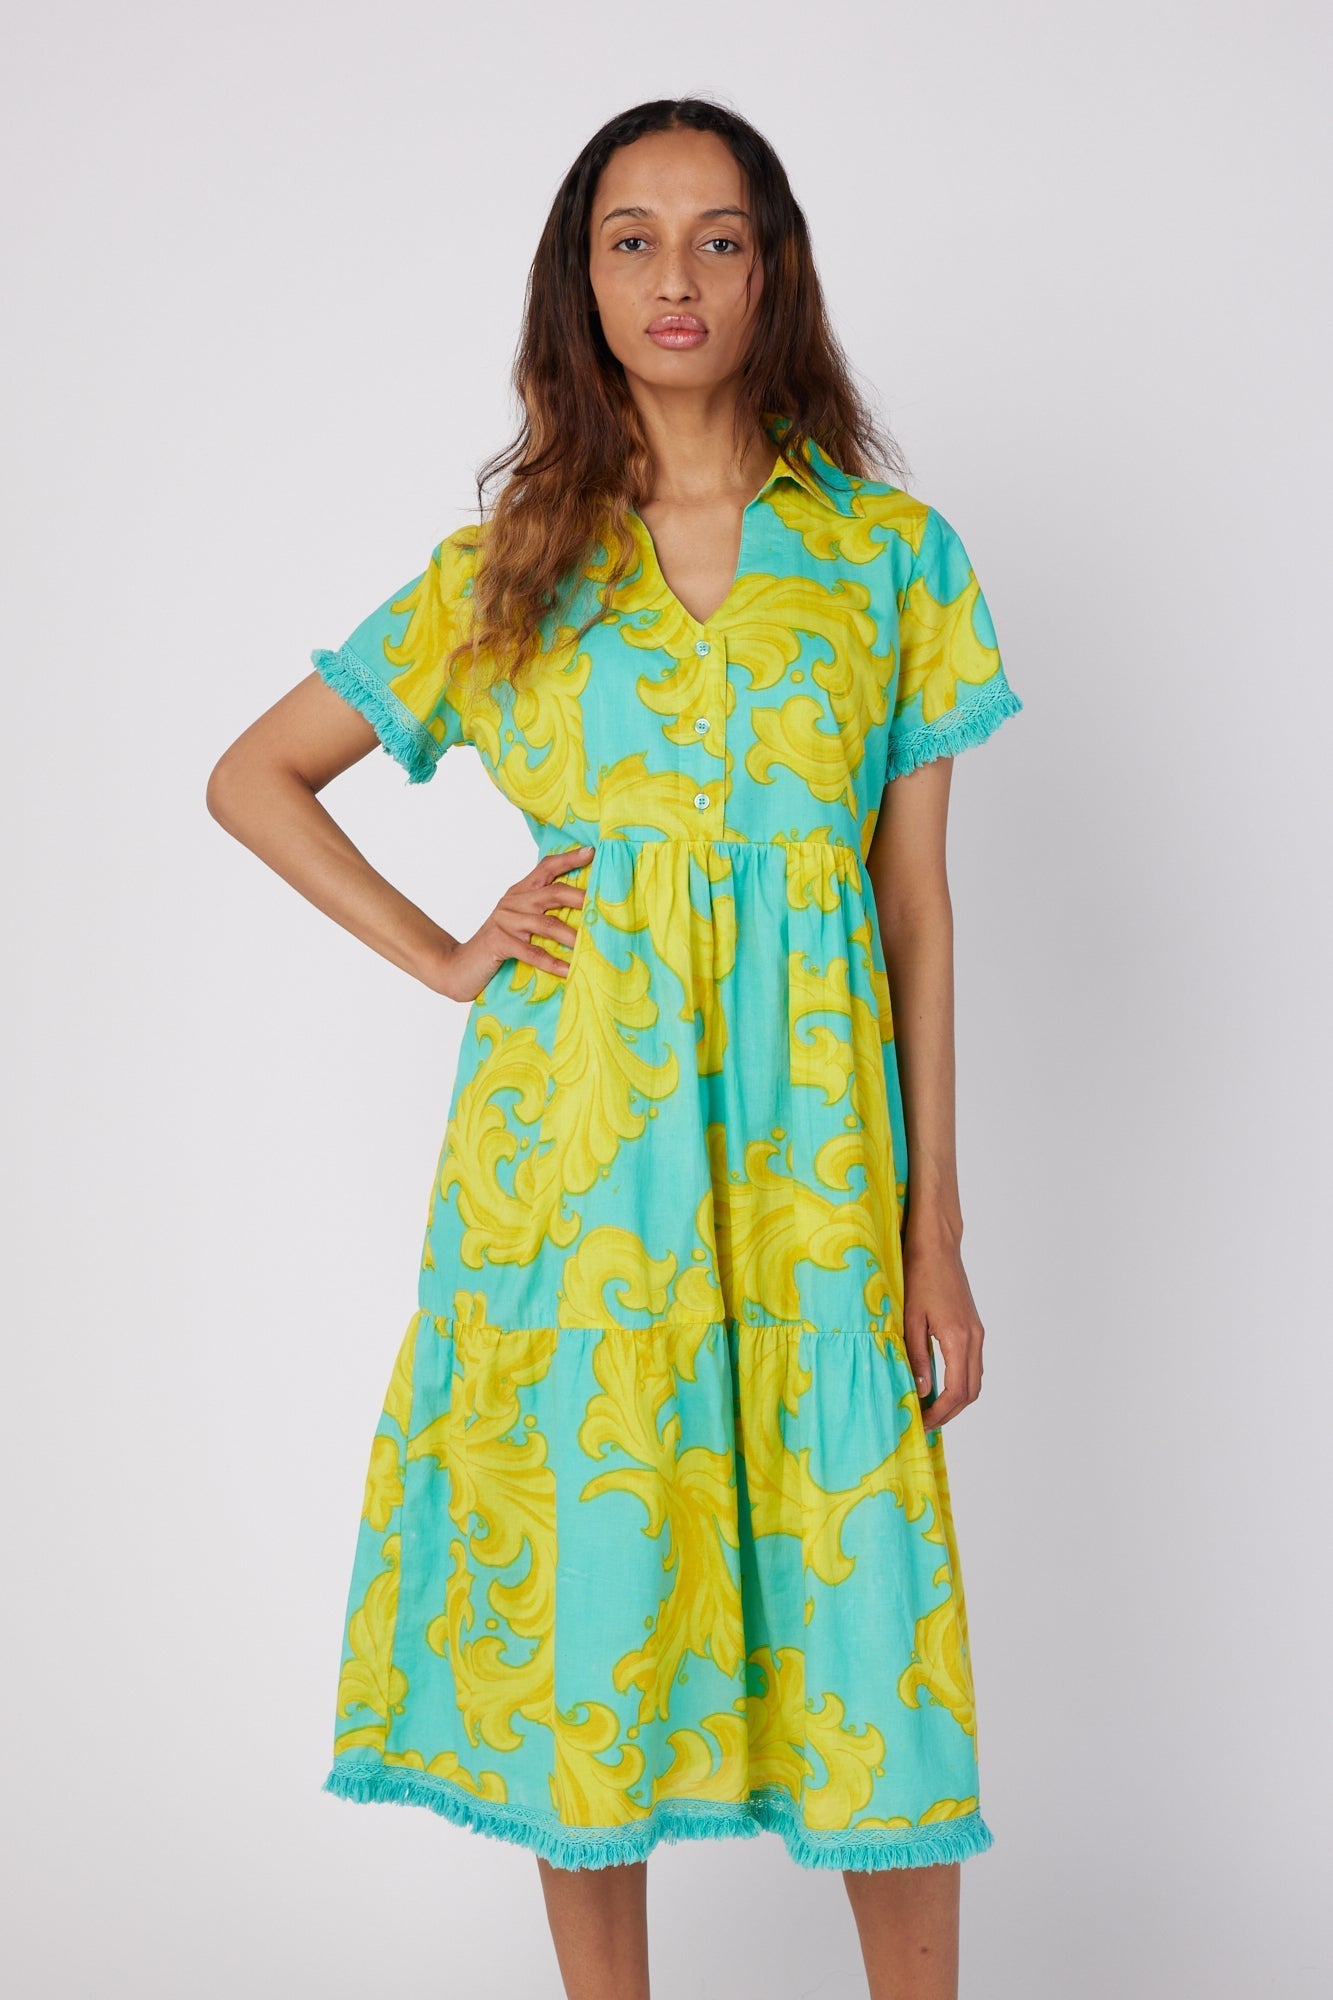 ModaPosa Cadenza Short Sleeve Midi Dress with Collar and Fringe Trim in Golden Baroque . Discover women's resort dresses and lifestyle clothing inspired by the Mediterranean. Free worldwide shipping available!